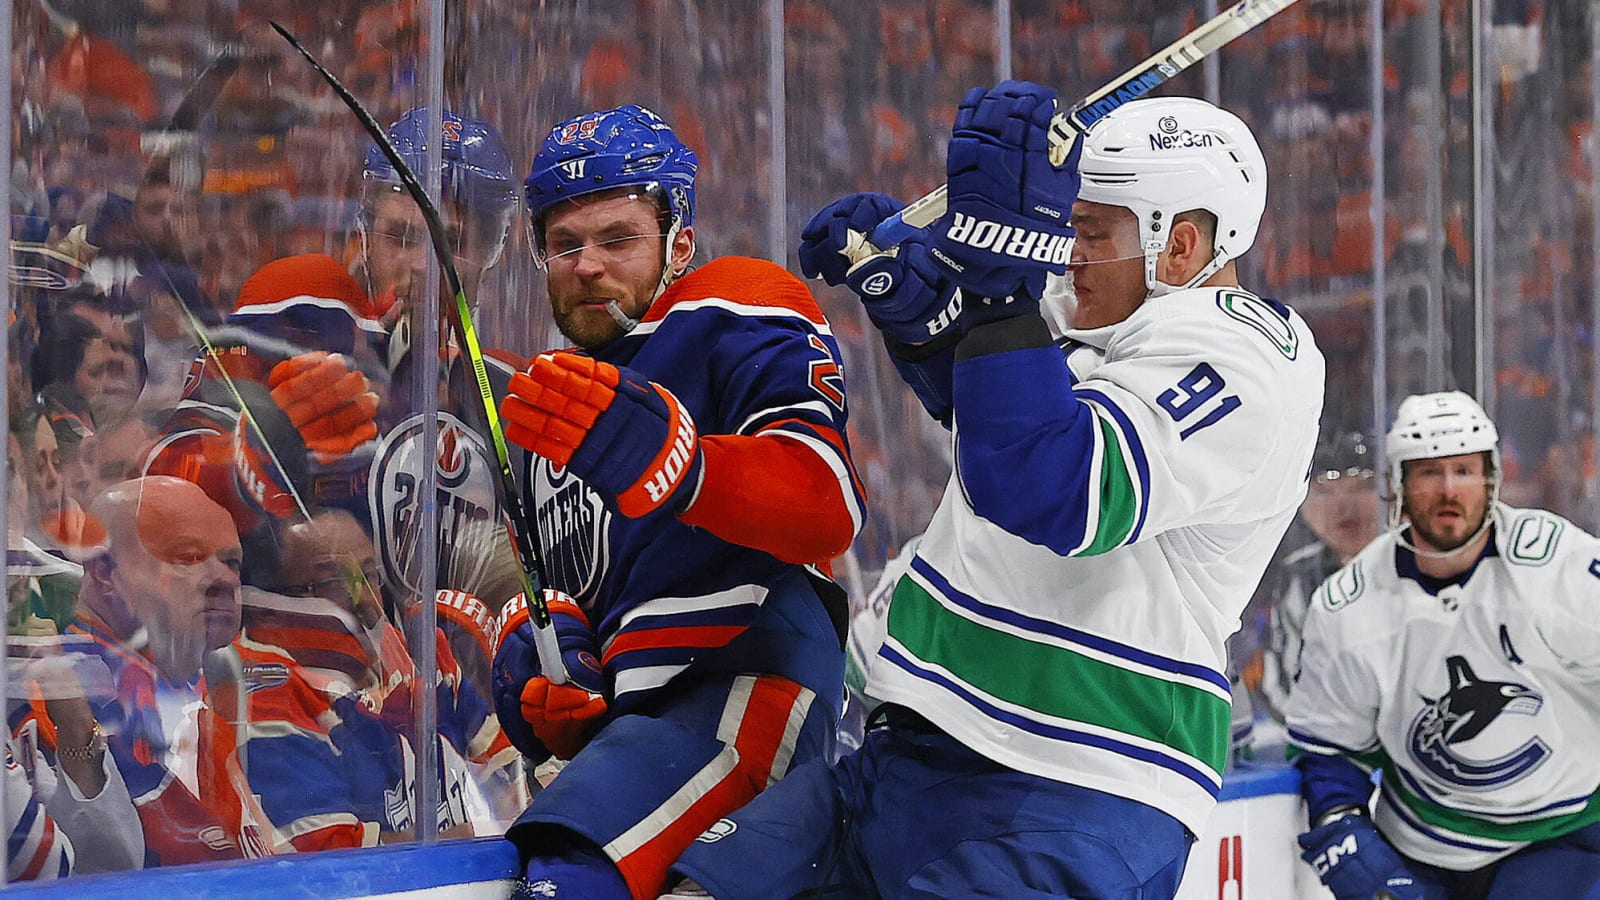 The Oilers got burned by giveaways and an inability to get a save, fall 4-3 in Game 3